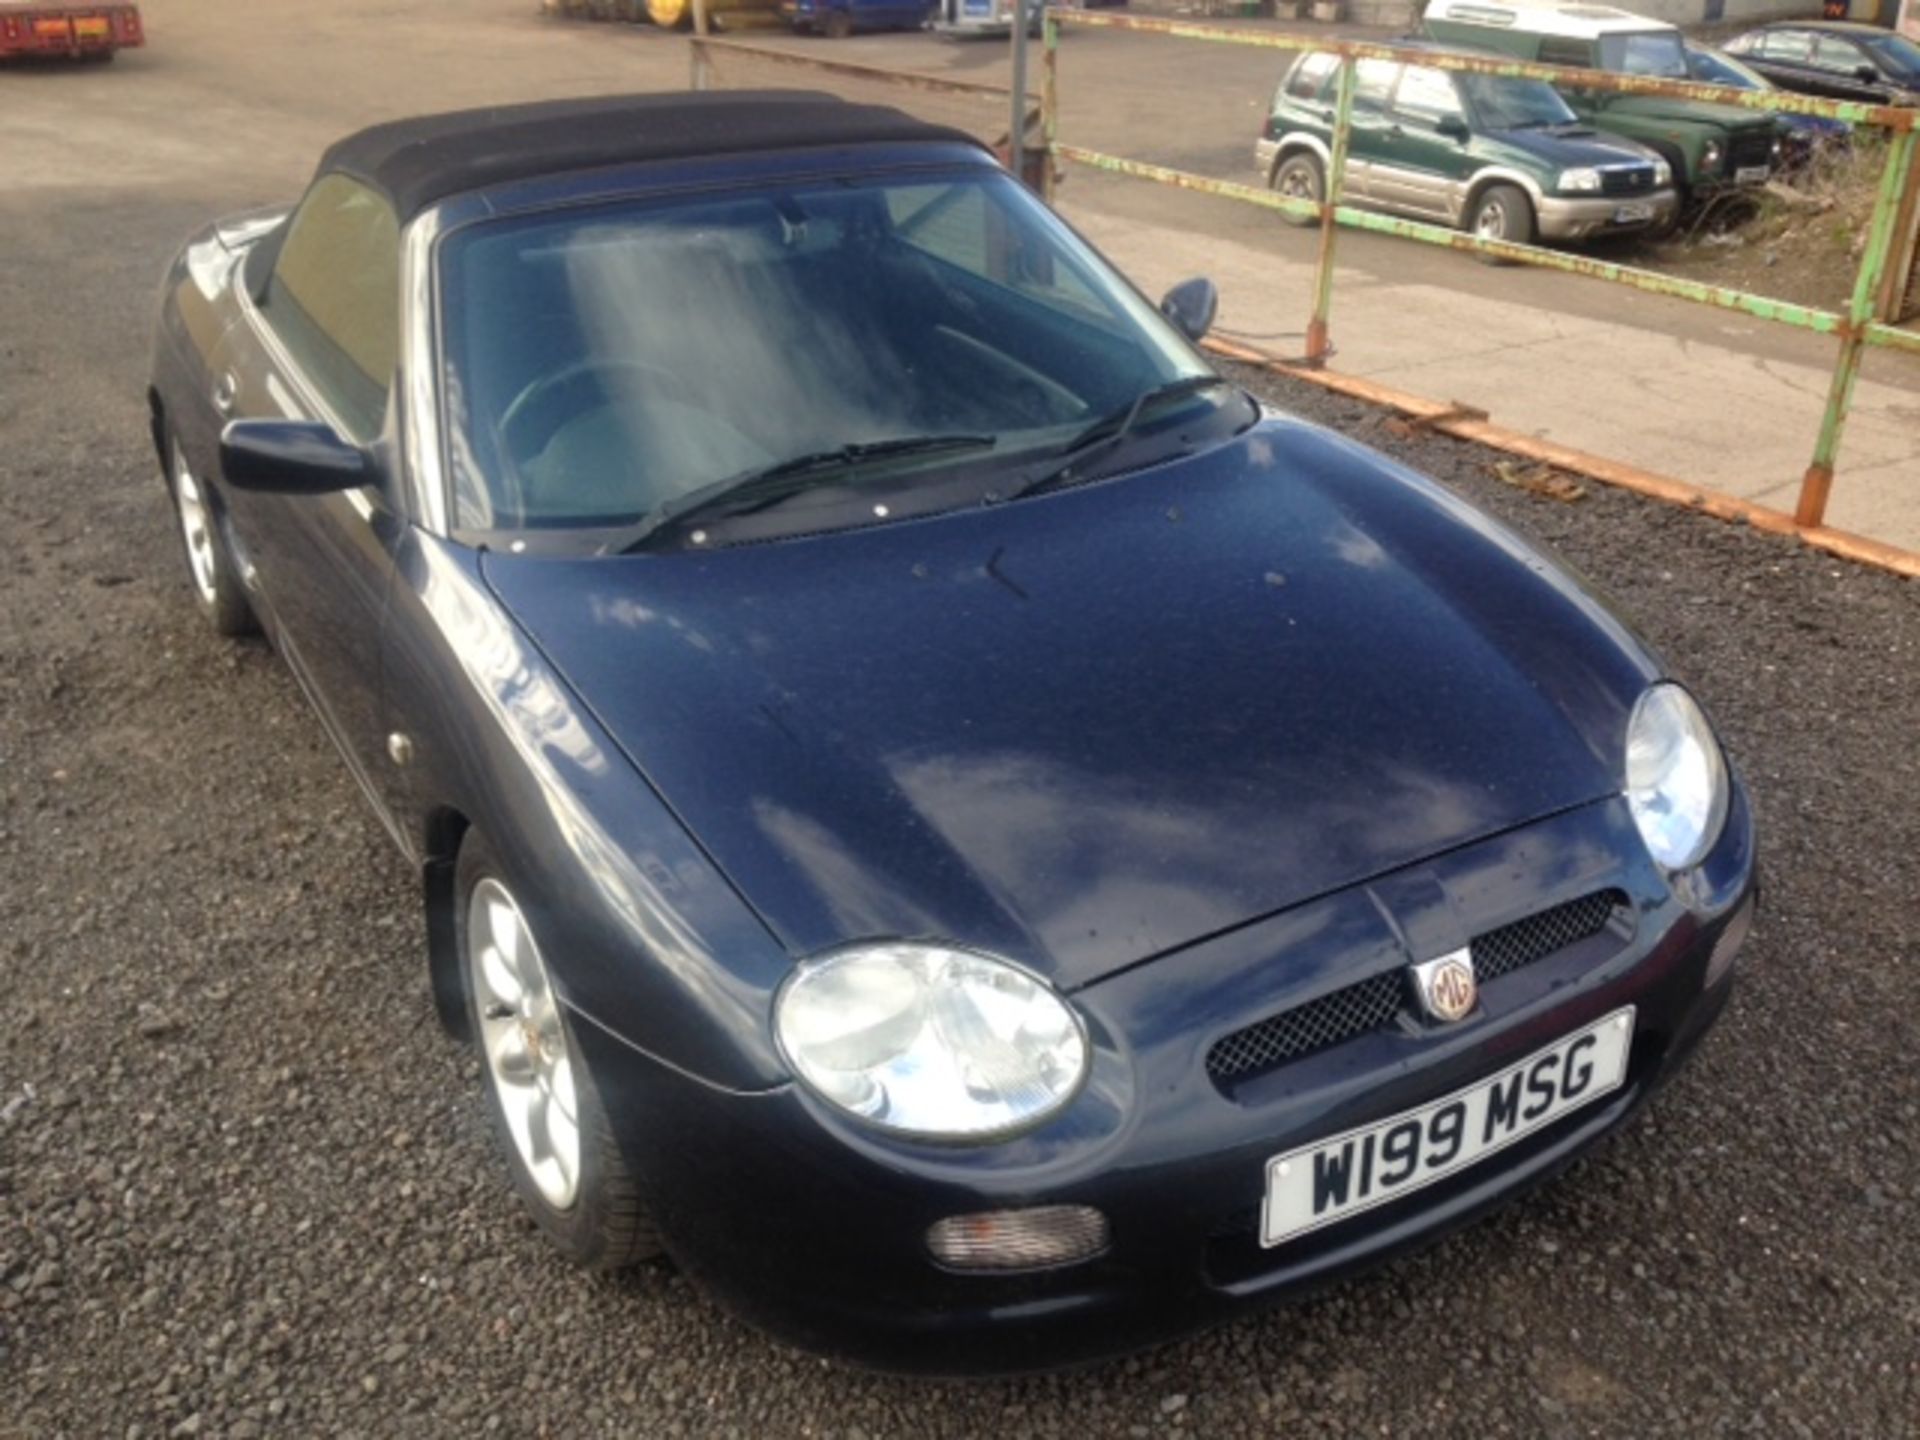 MG, MGF - 1796cc, Chassis number SARRDWBGB1D520764 - supplied new on June 30th 2000 by "A.F. - Image 6 of 7